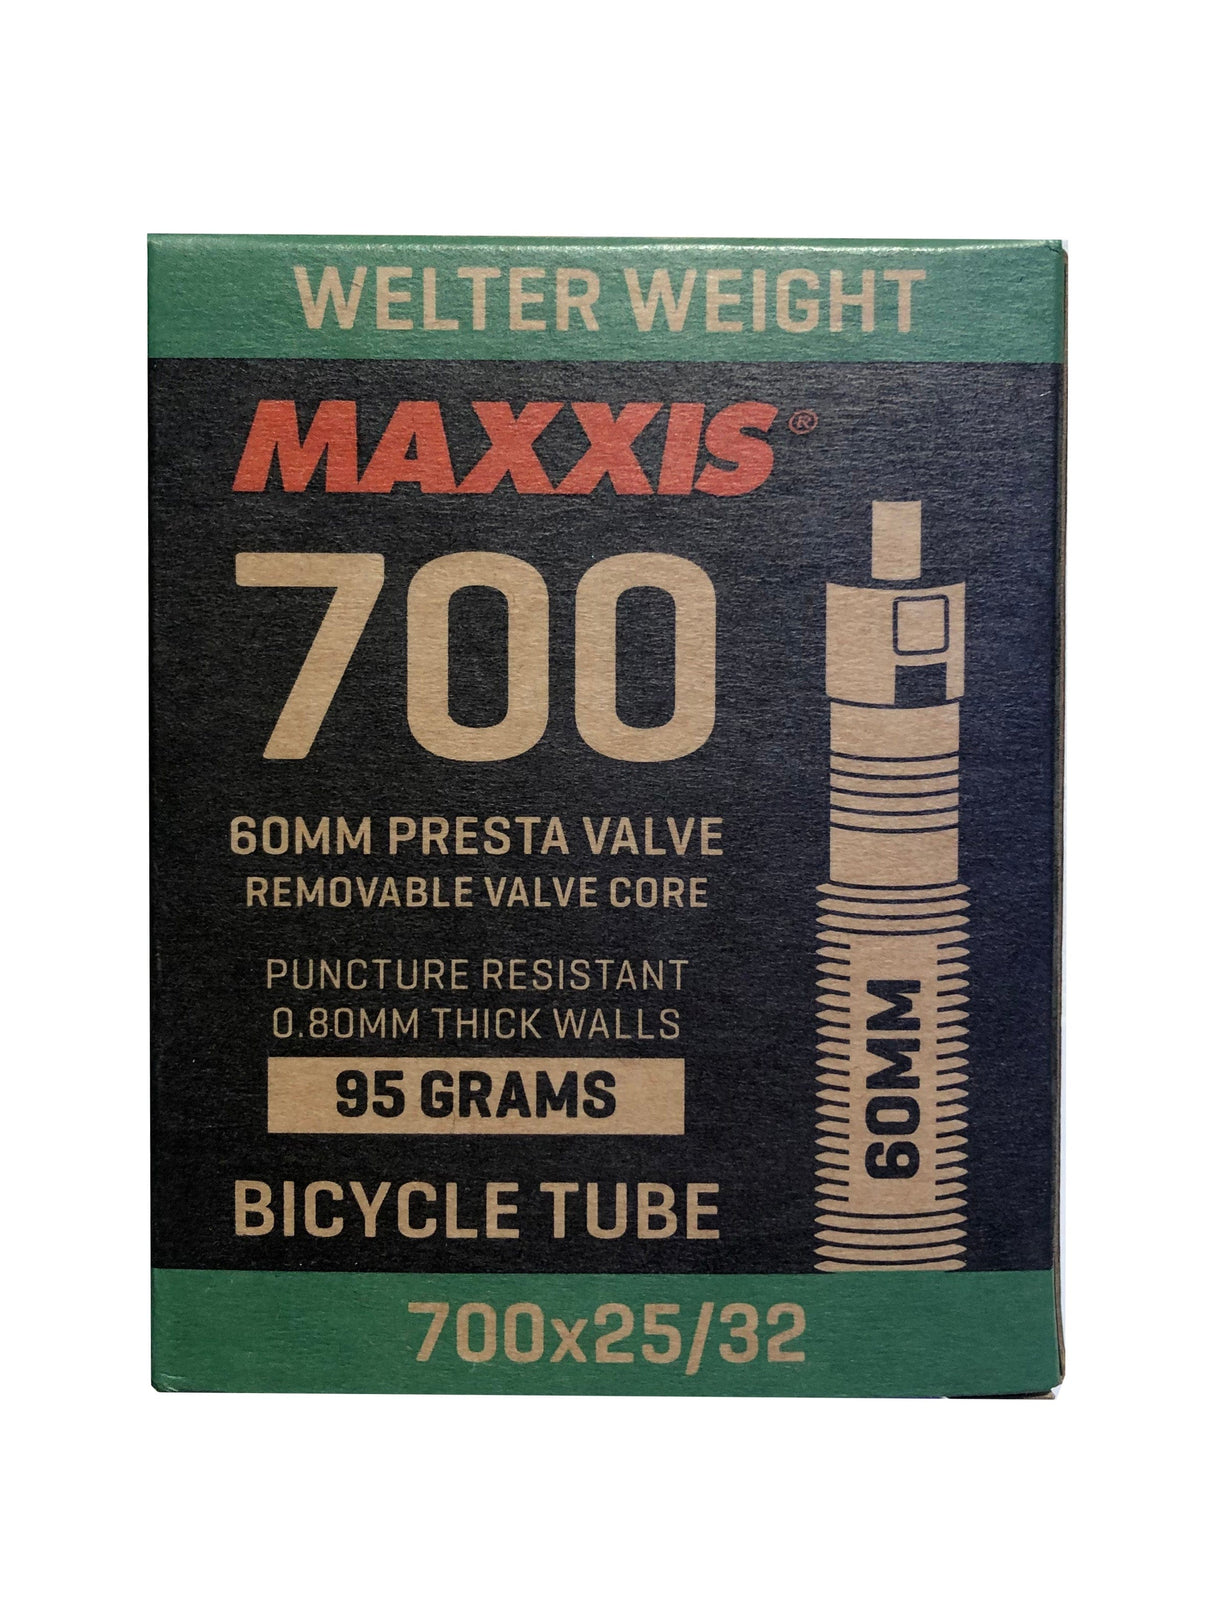 MAXXIS Tube Welter Weight 700x25 32C Presta FV RVC 60mm